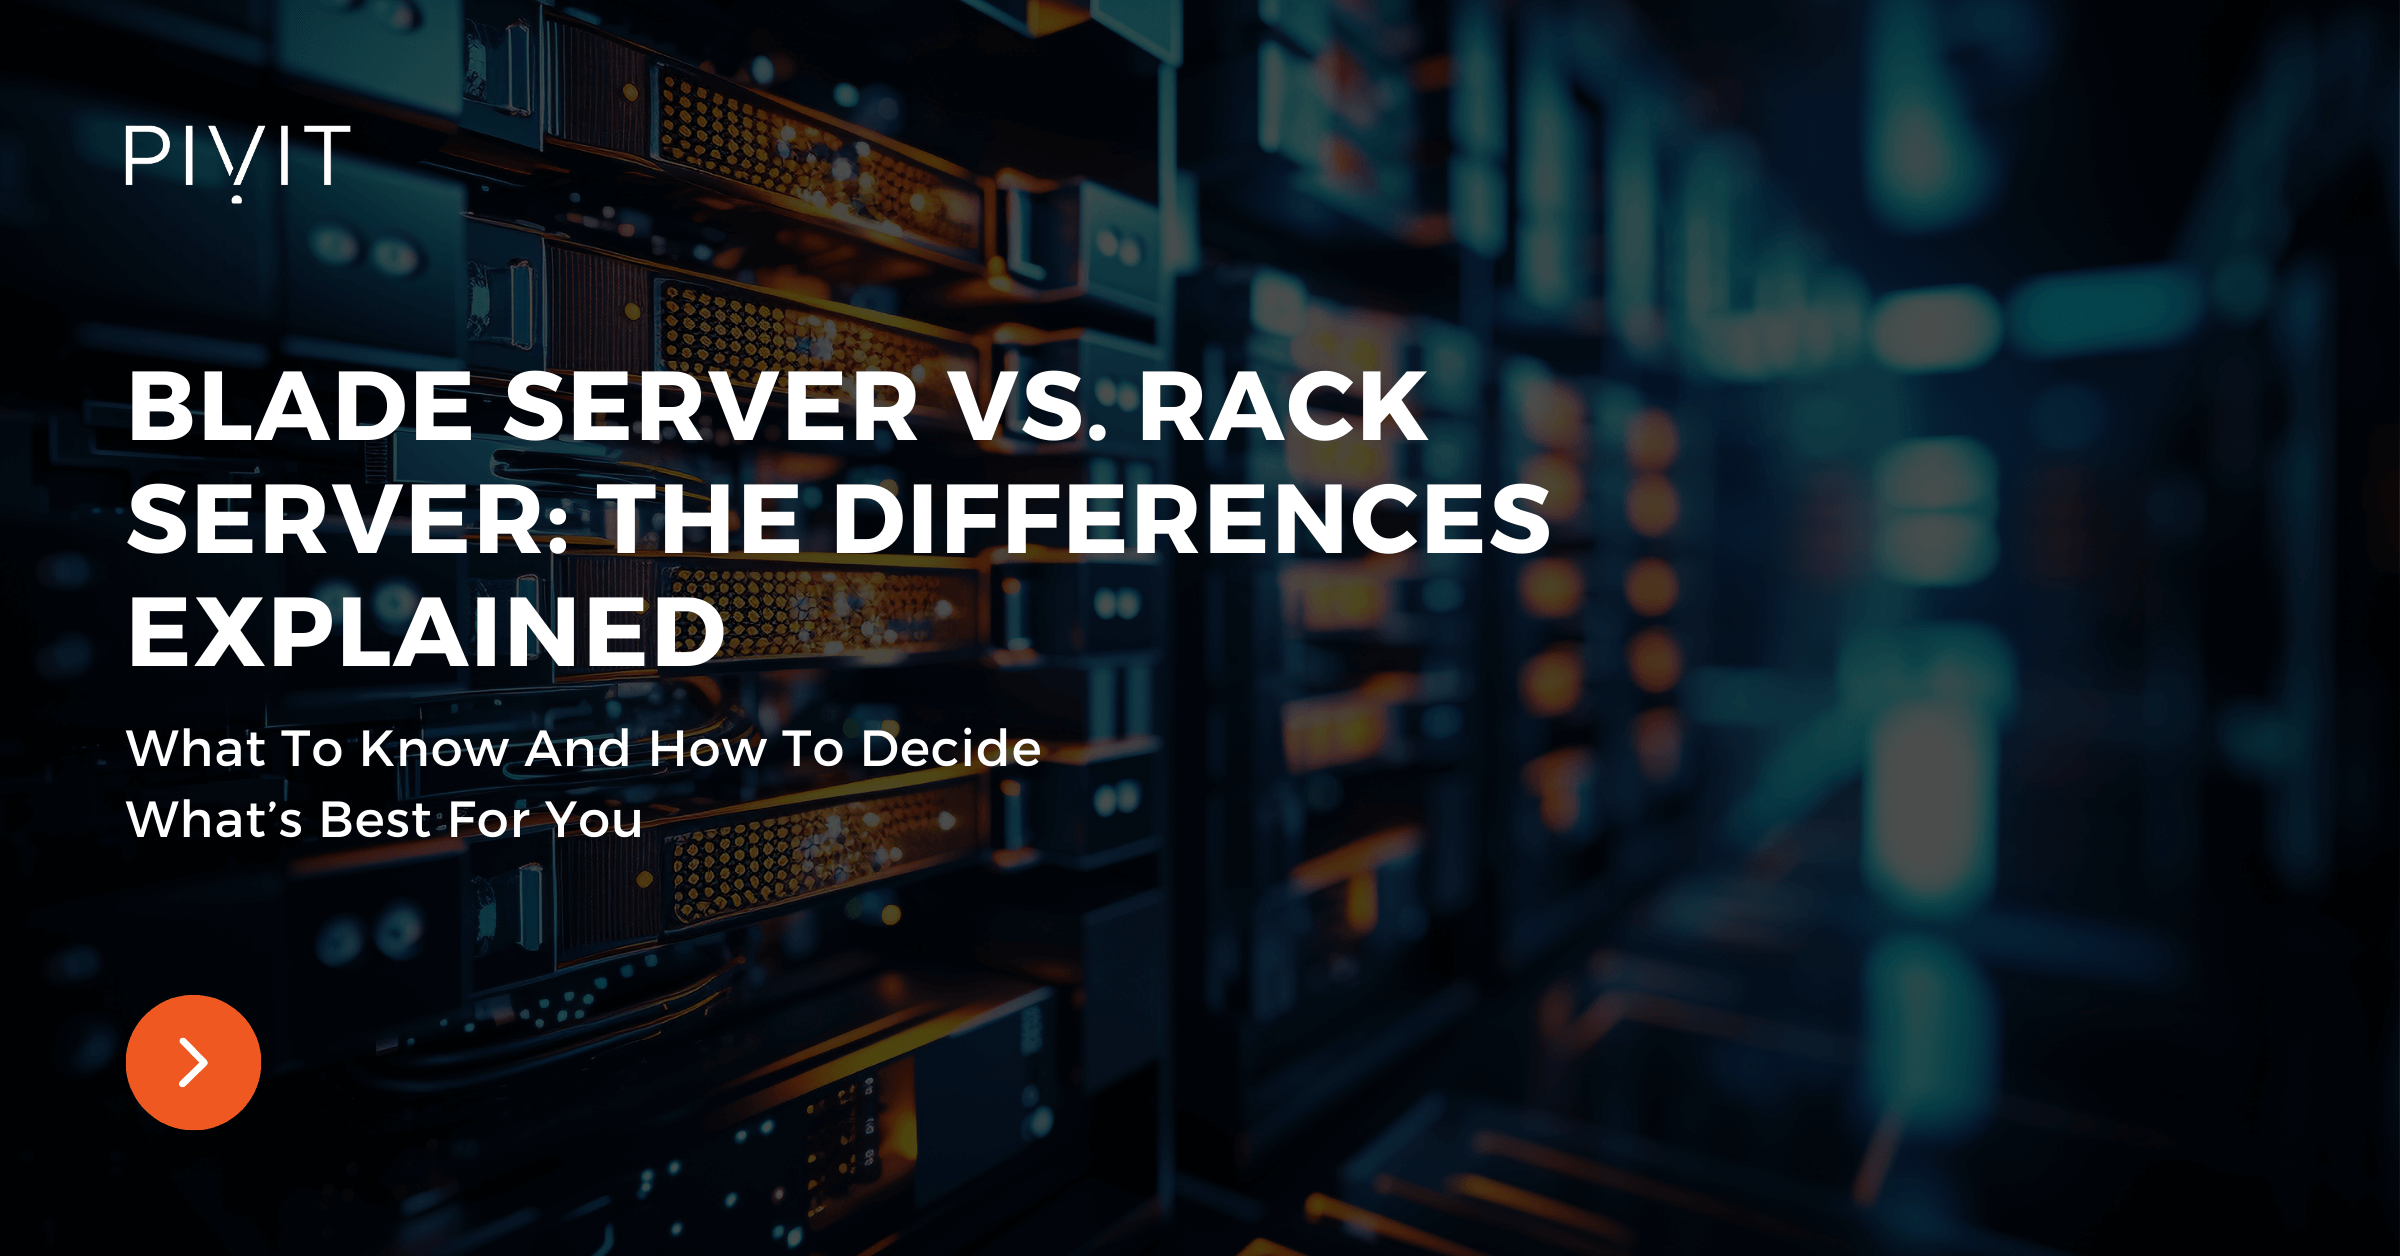 Blade Server Vs. Rack Server: The Differences Explained - What To Know And How To Decide What’s Best For You